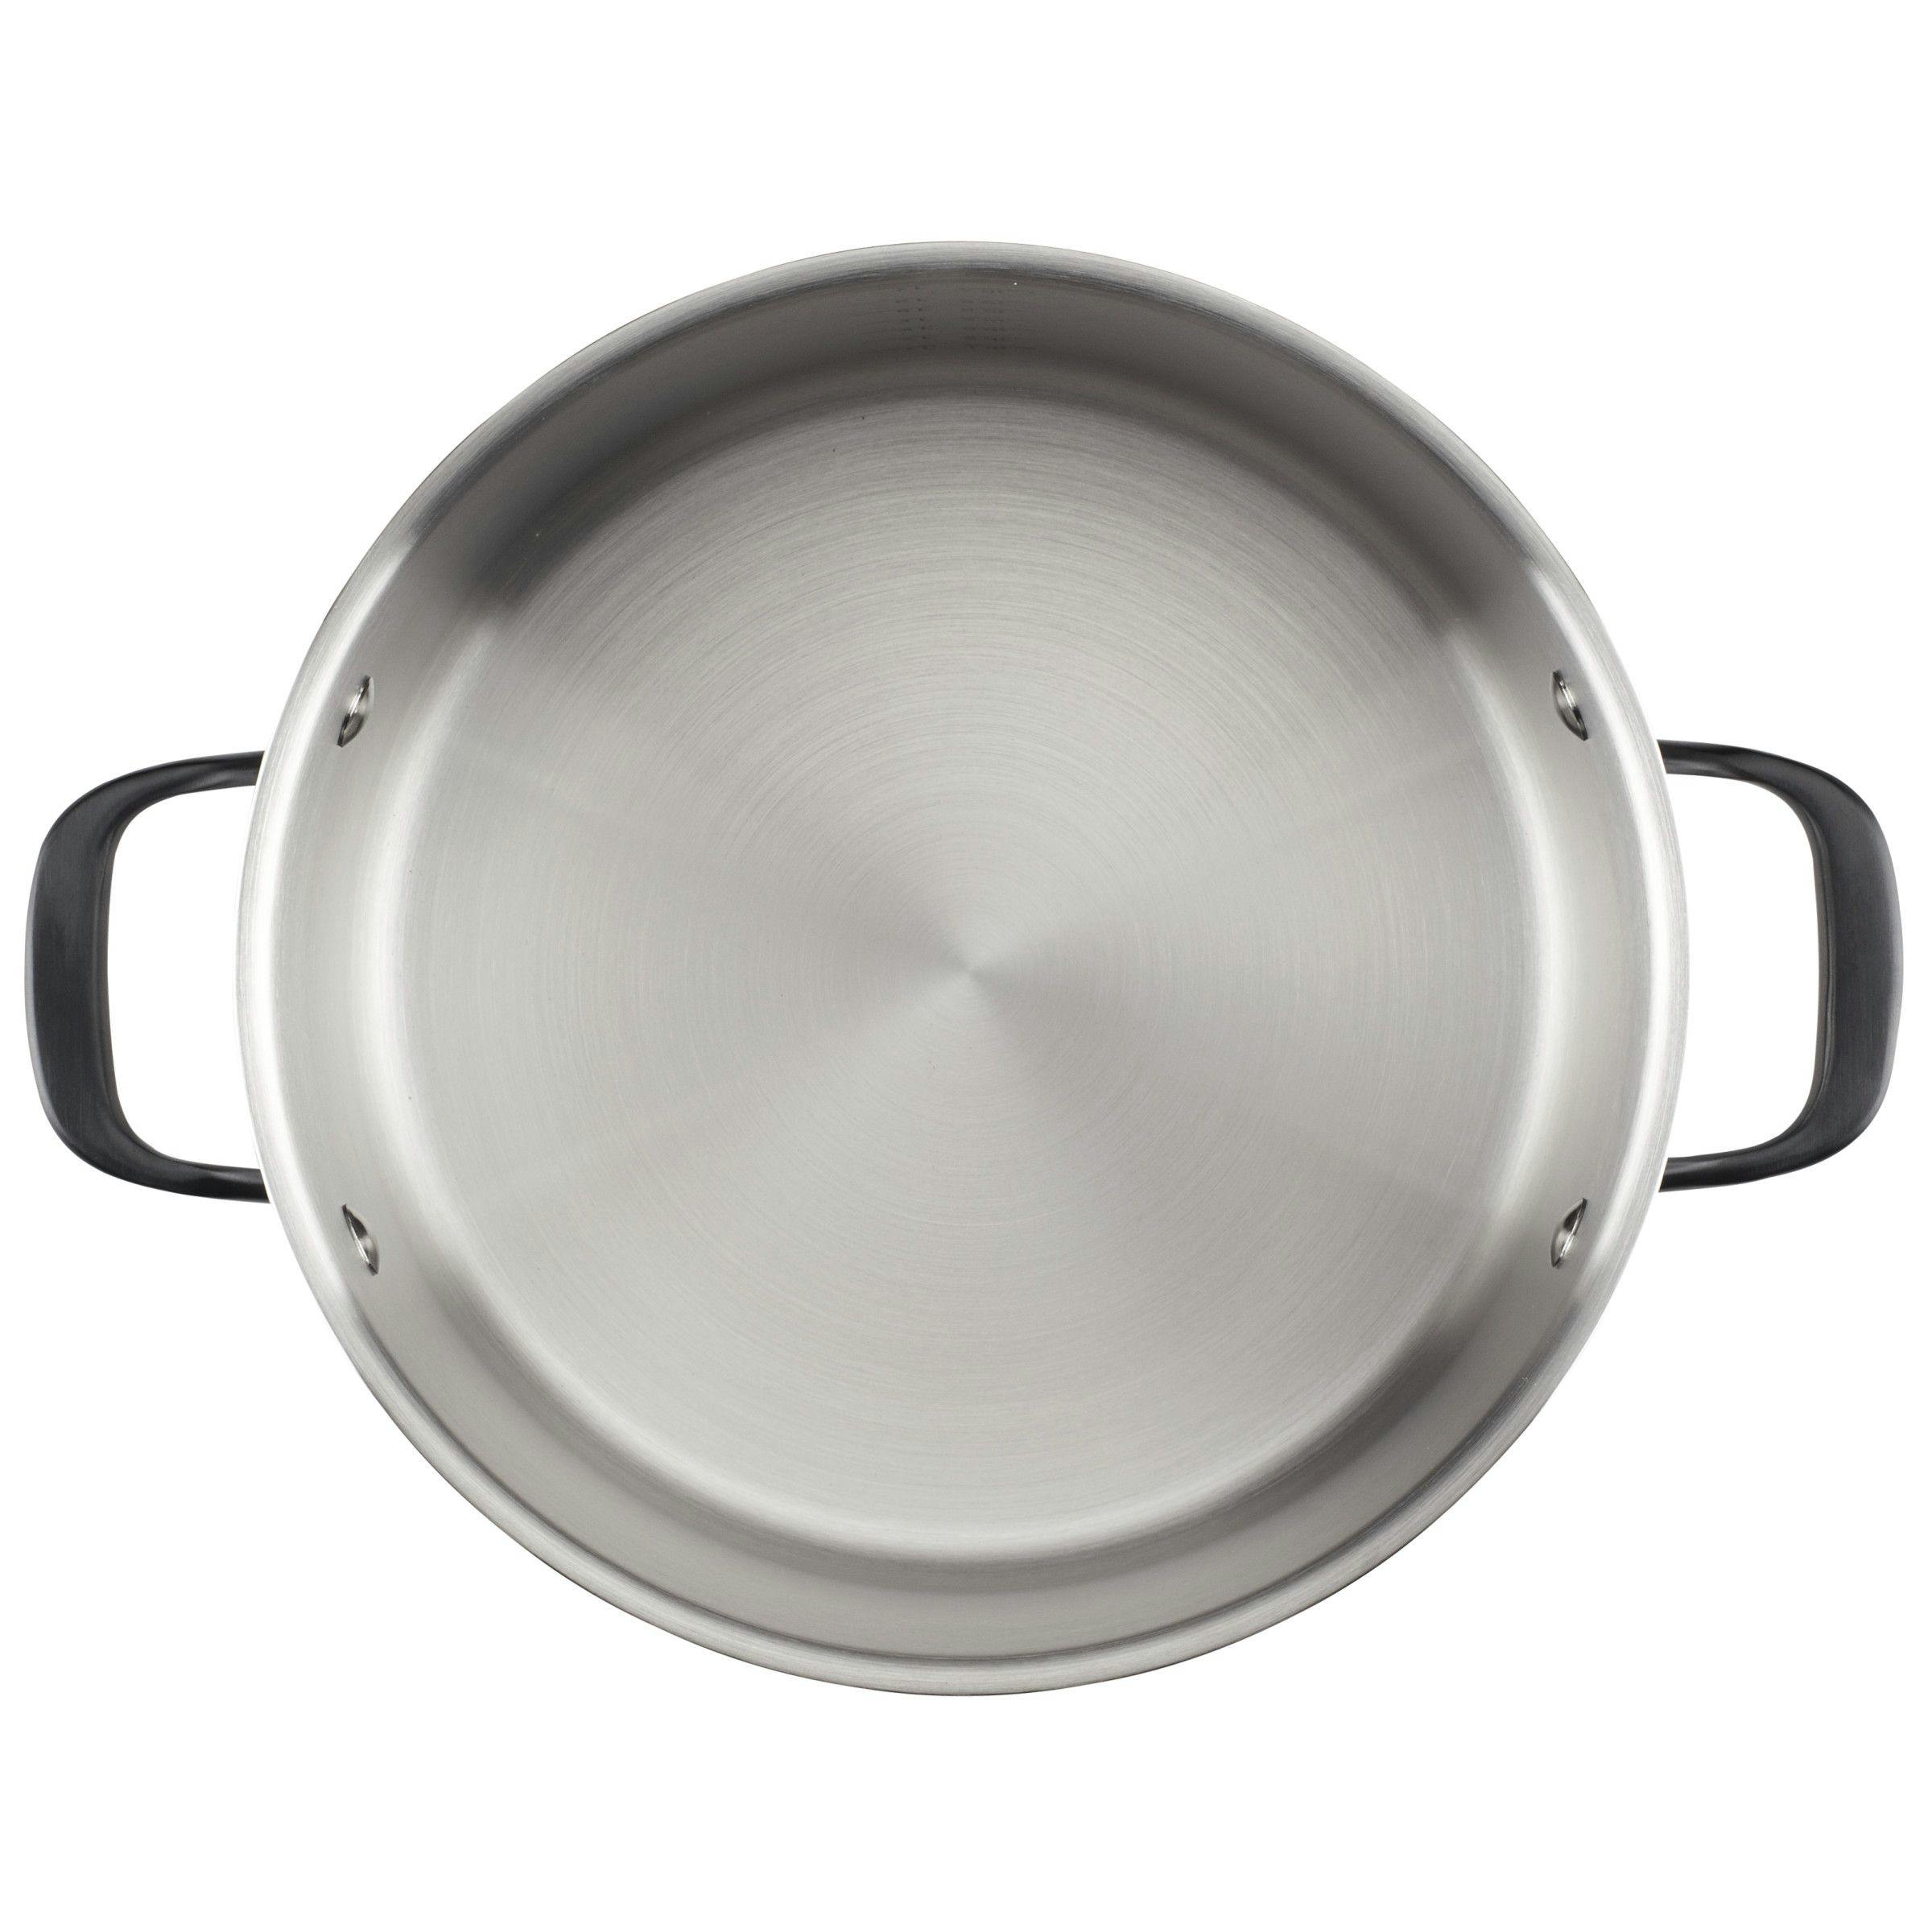 KitchenAid 5-Ply Clad Stainless Steel Stockpot with Lid, 8-Quart, Polished Stainless Steel